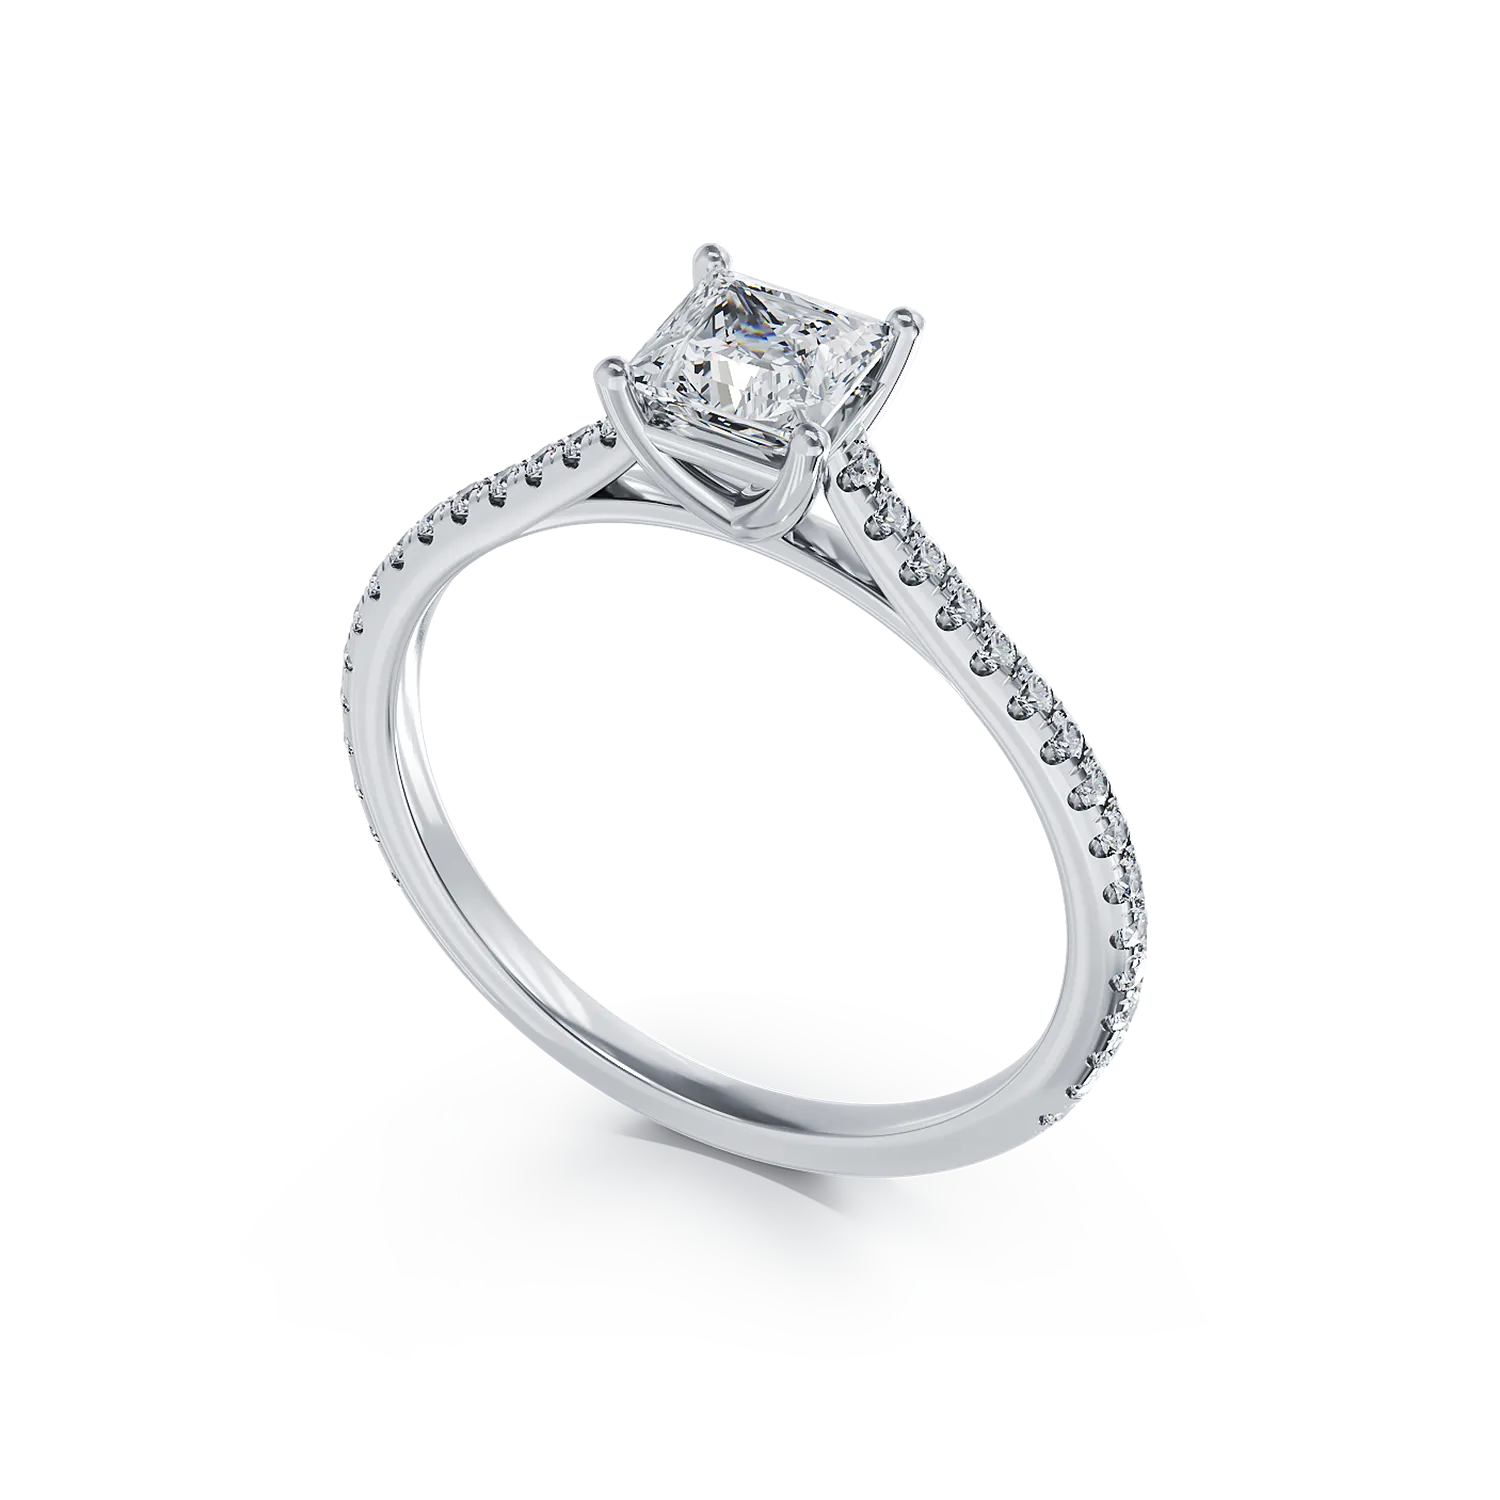 18K white gold engagement ring with one 0.61ct diamond and 0.186ct diamonds